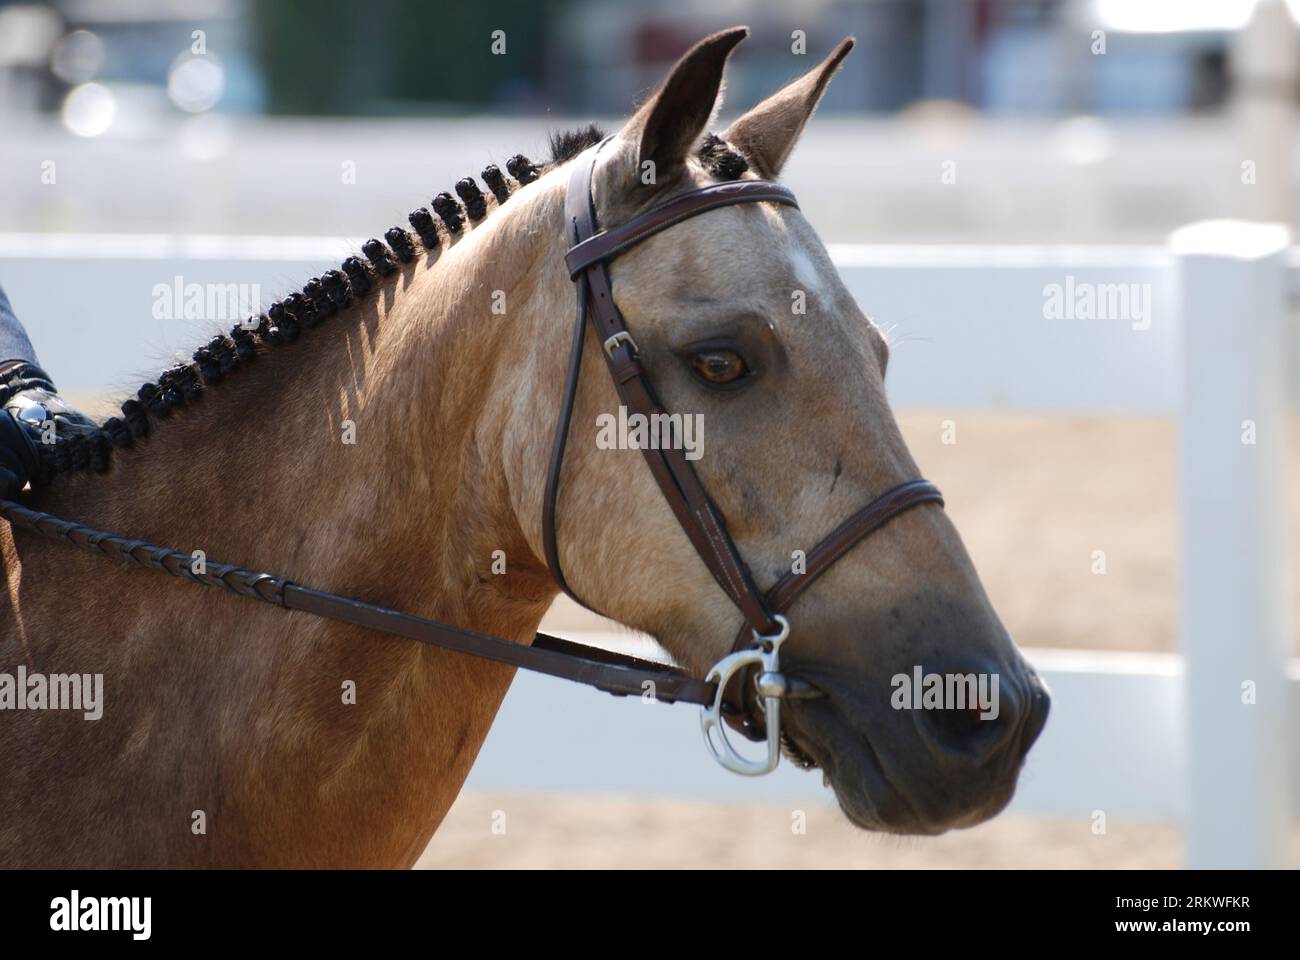 Gorgeous strawberry roan Arabian horse under saddle at a horse show. Stock Photo